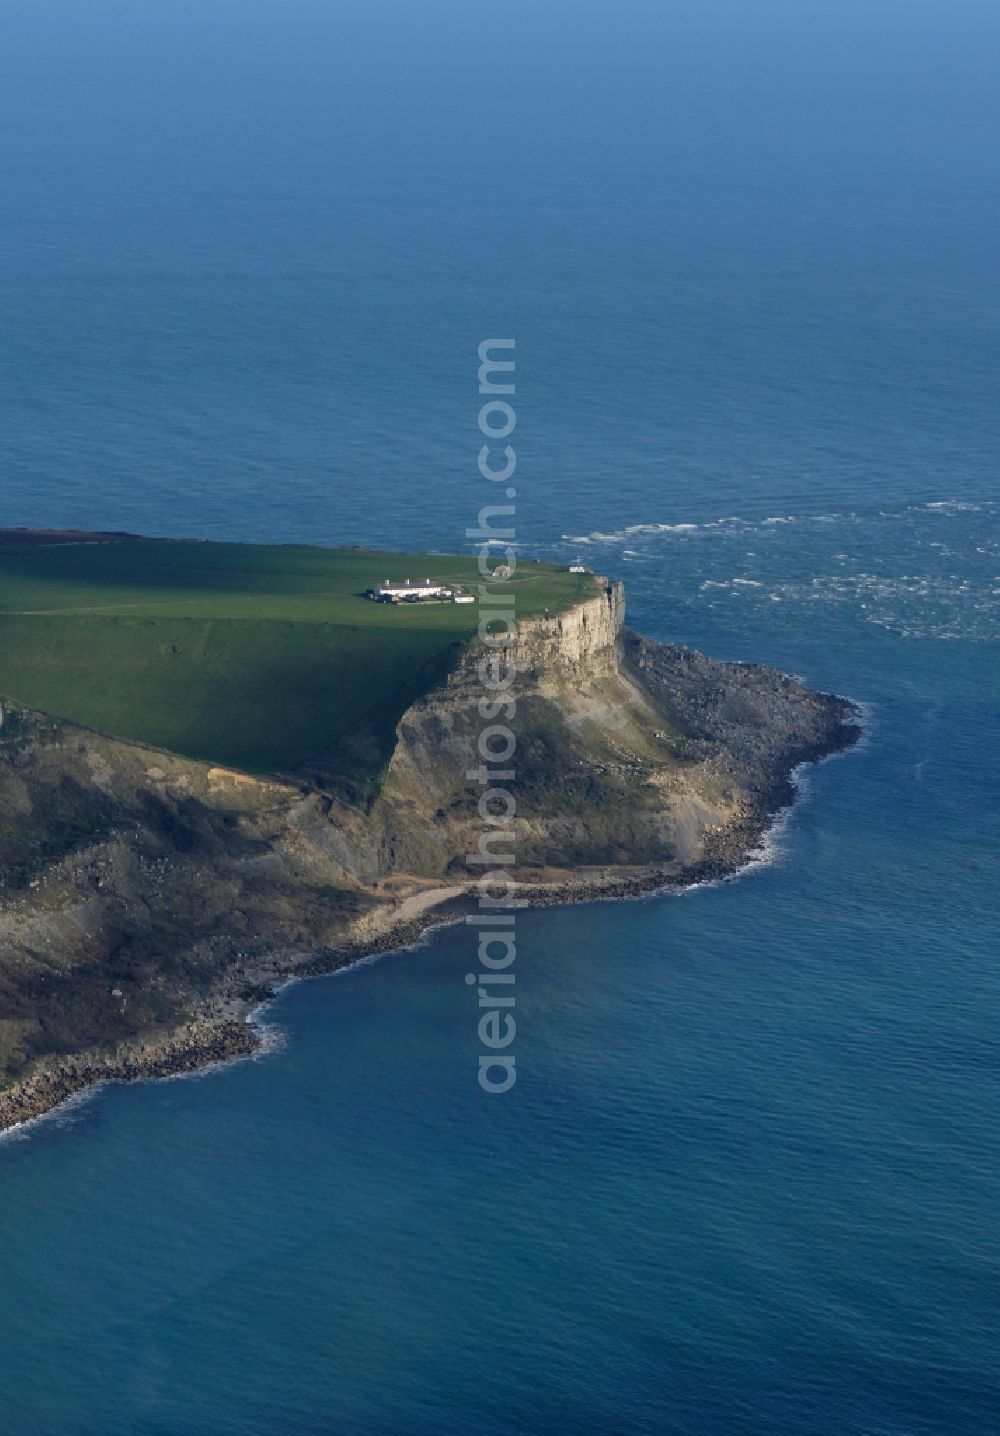 Aerial image Worth Matravers - Coastline at the rocky cliffs of of English Channel St Aldheim's Head in Worth Matravers in England, United Kingdom